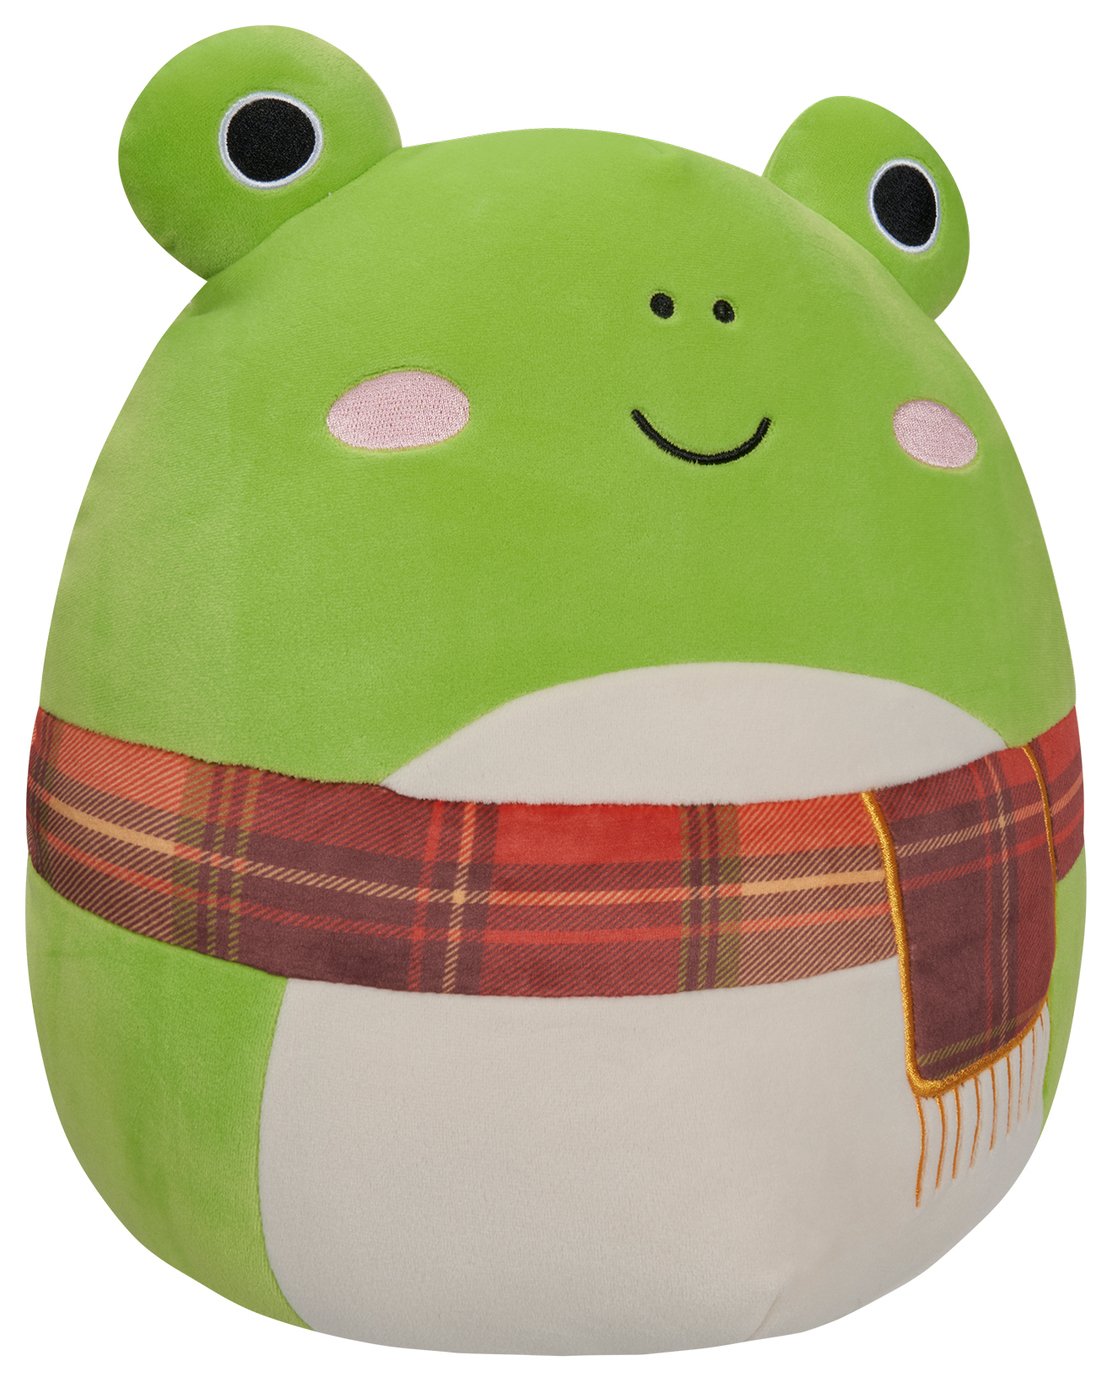 Original Squishmallows 12-inch - Wendy The Green Frog